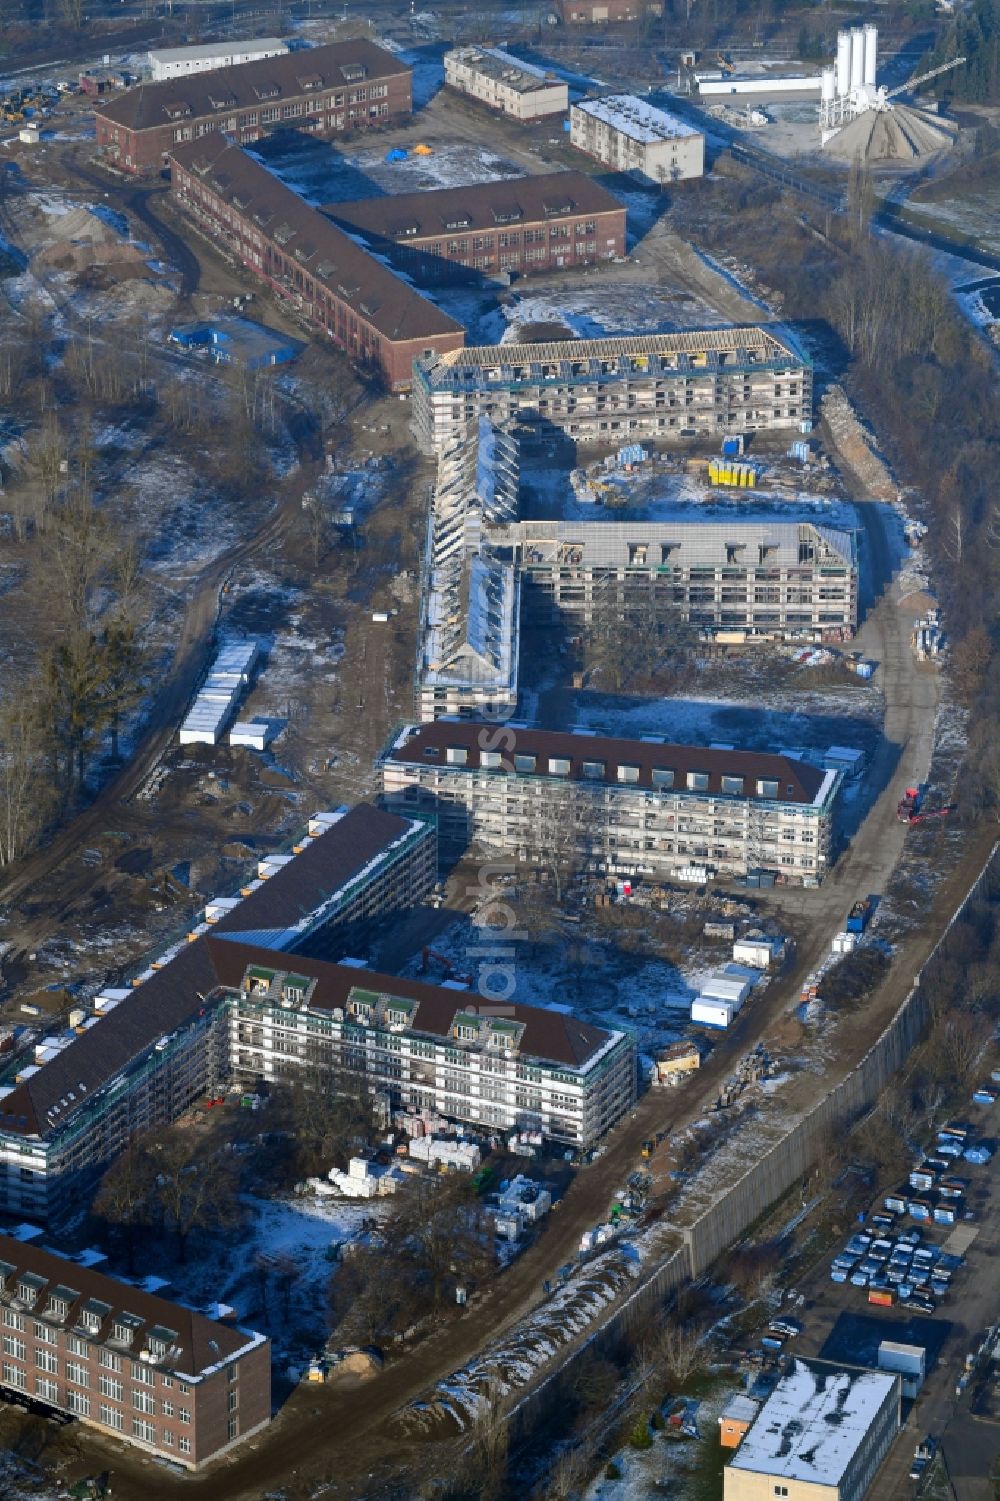 Aerial image Bernau - Construction site for the renovation and reconstruction of the building complex of the former military barracks Sanierungsgebiet Panke-Park on Schoenfelder Weg in Bernau in the state Brandenburg, Germany